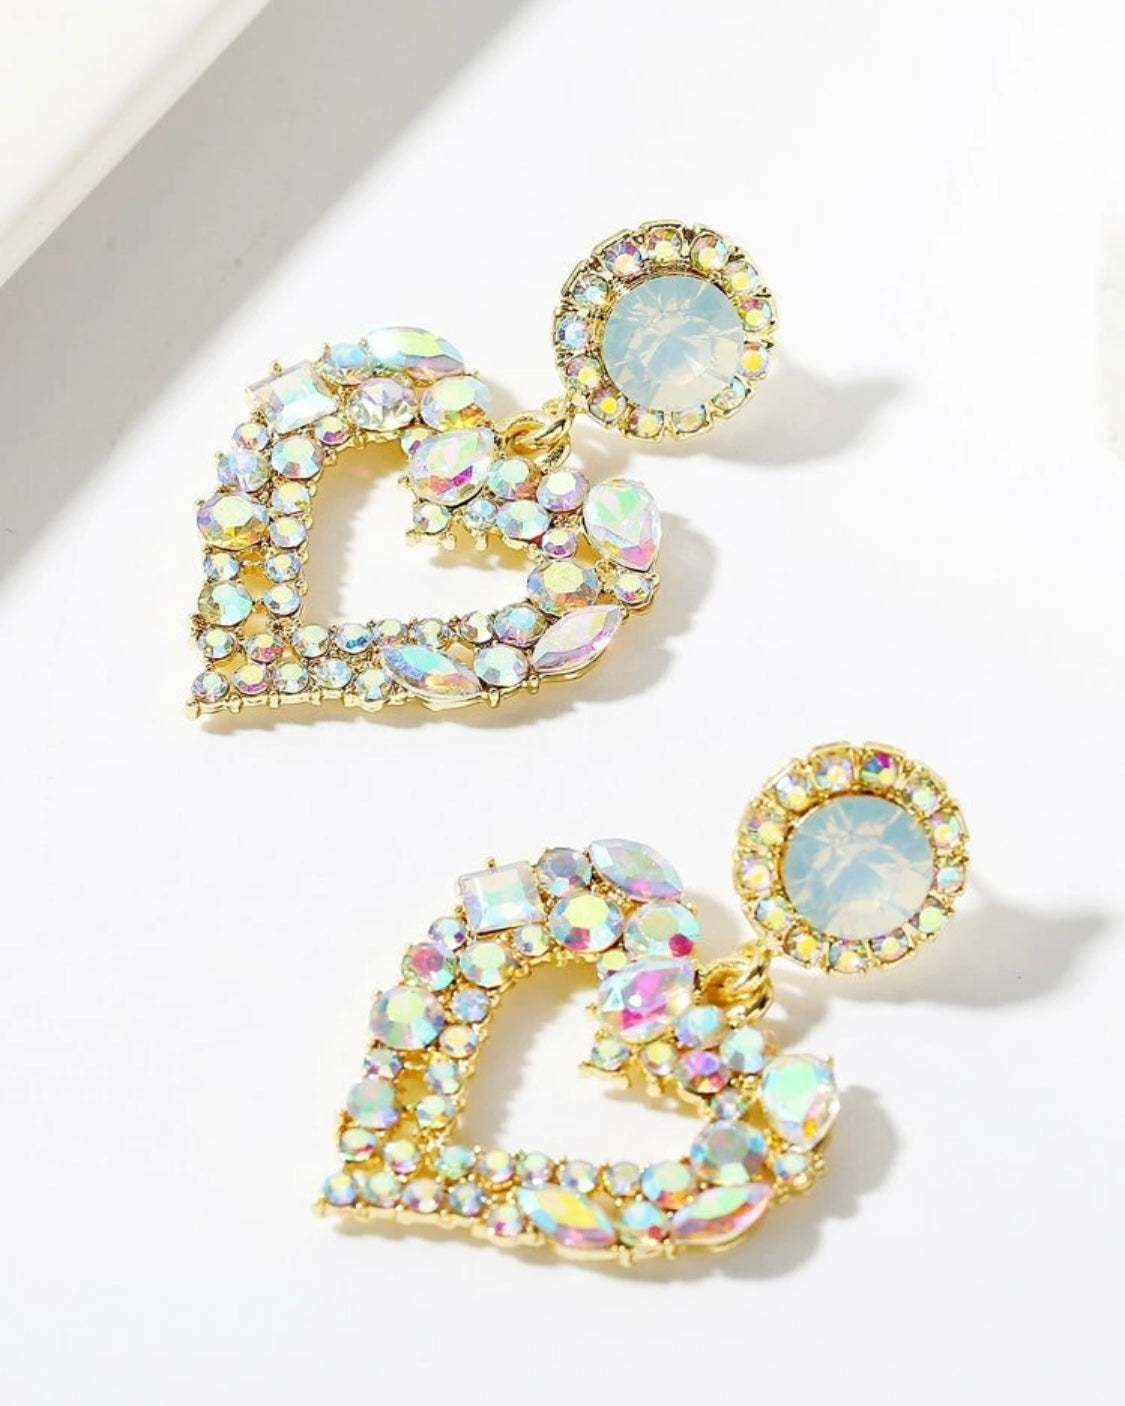 Loved the Most Heart Earrings - Gold